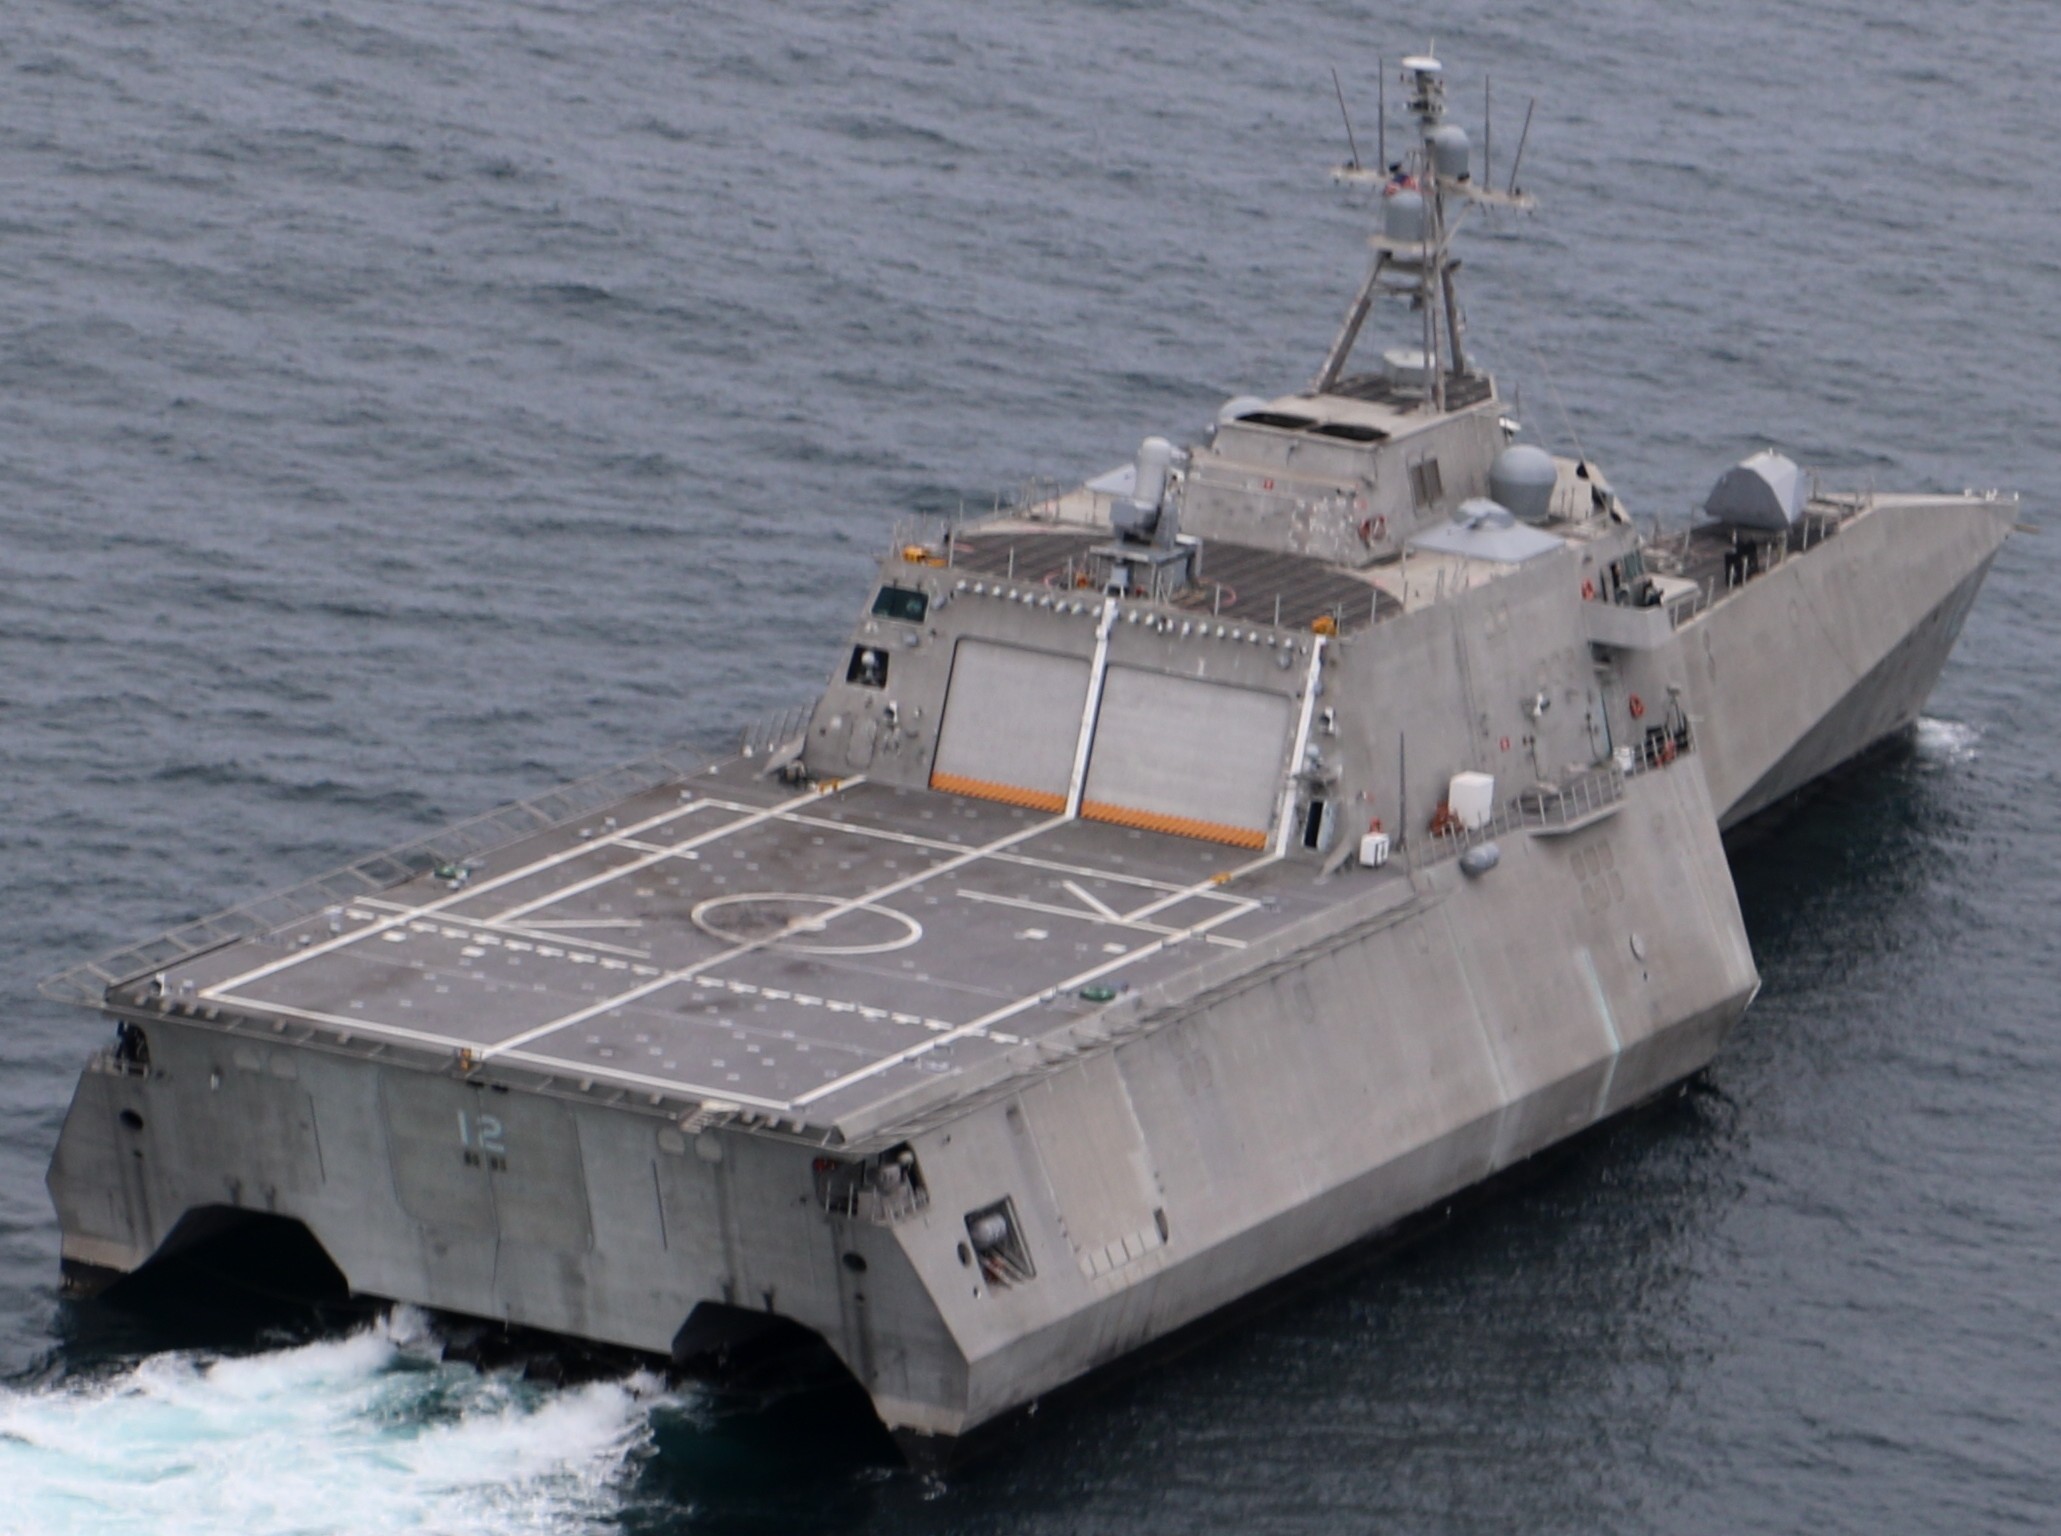 lcs-12 uss omaha independence class littoral combat ship us navy 18 pacific ocean